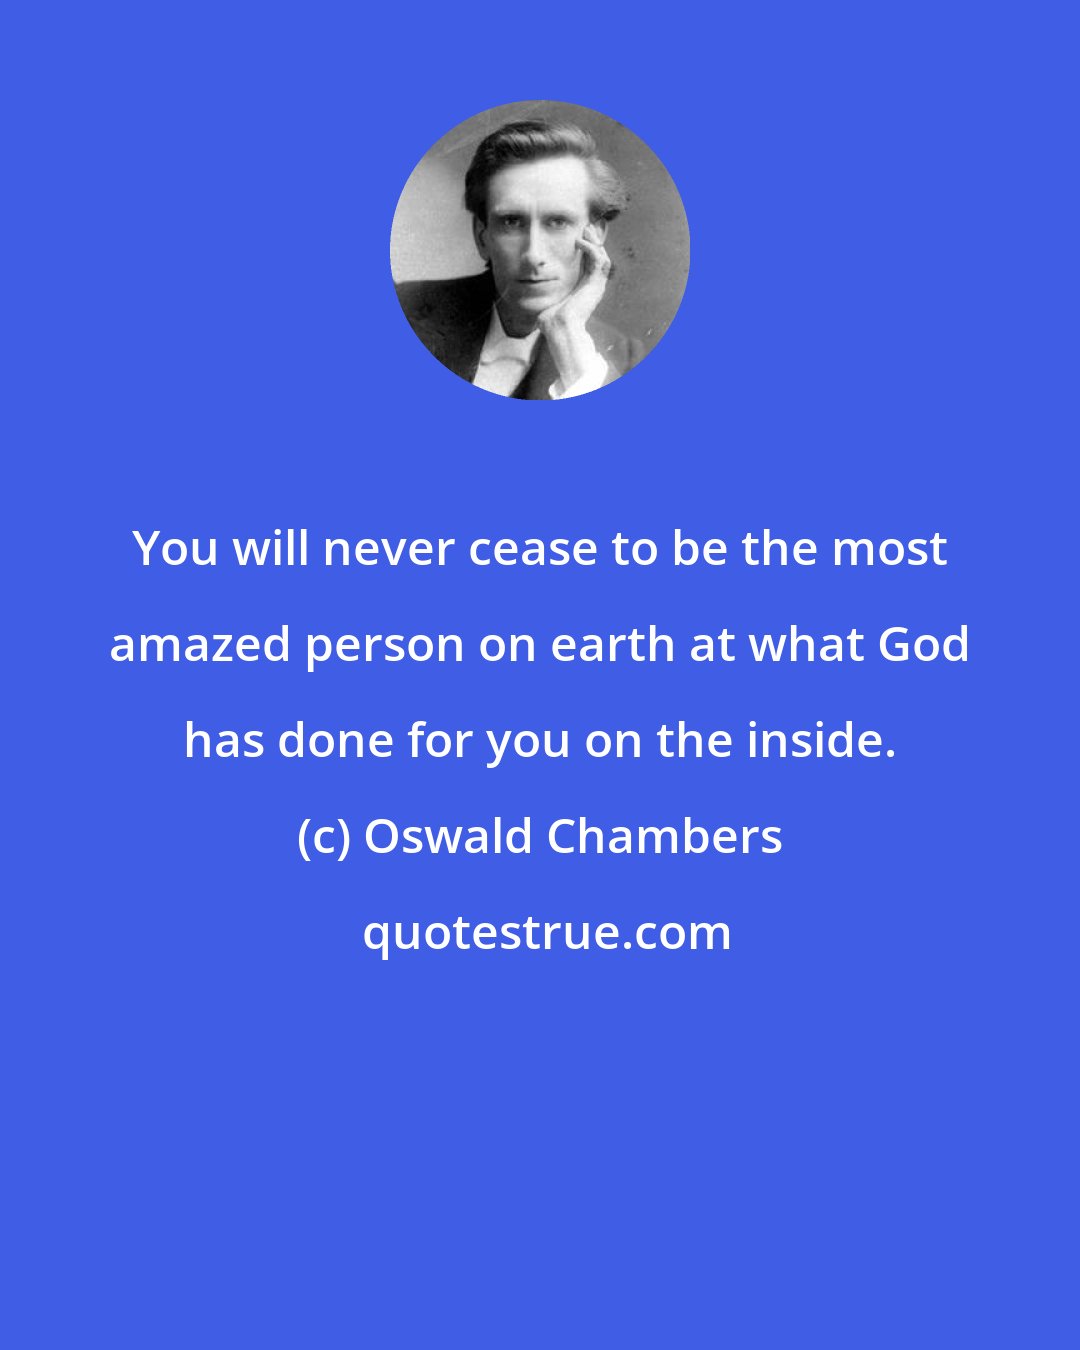 Oswald Chambers: You will never cease to be the most amazed person on earth at what God has done for you on the inside.